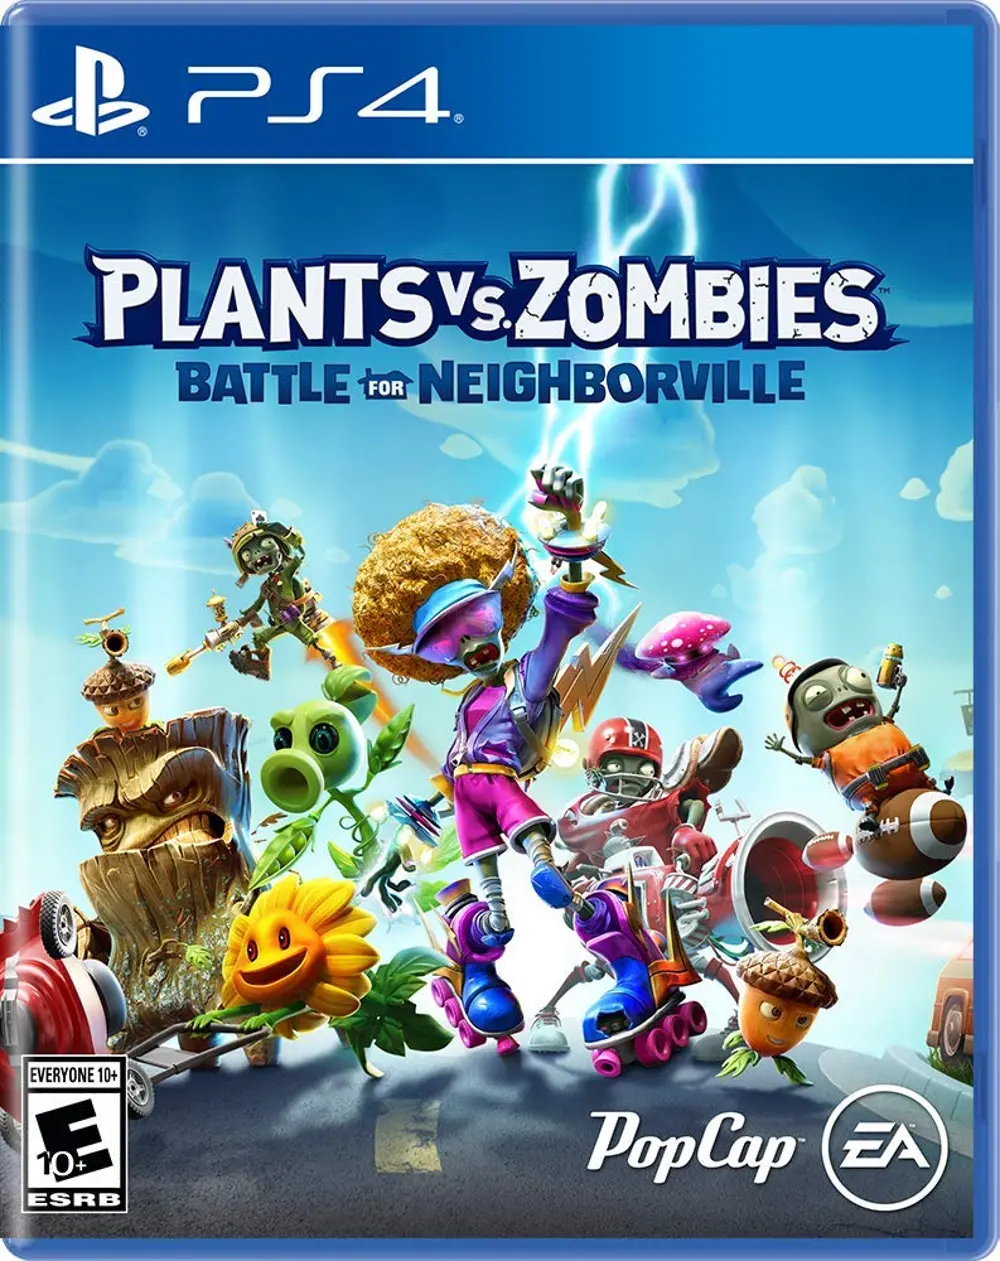 PS4 ELA 37076 Plants vs. Zombies: The Battle for Neighborville - PS4-1